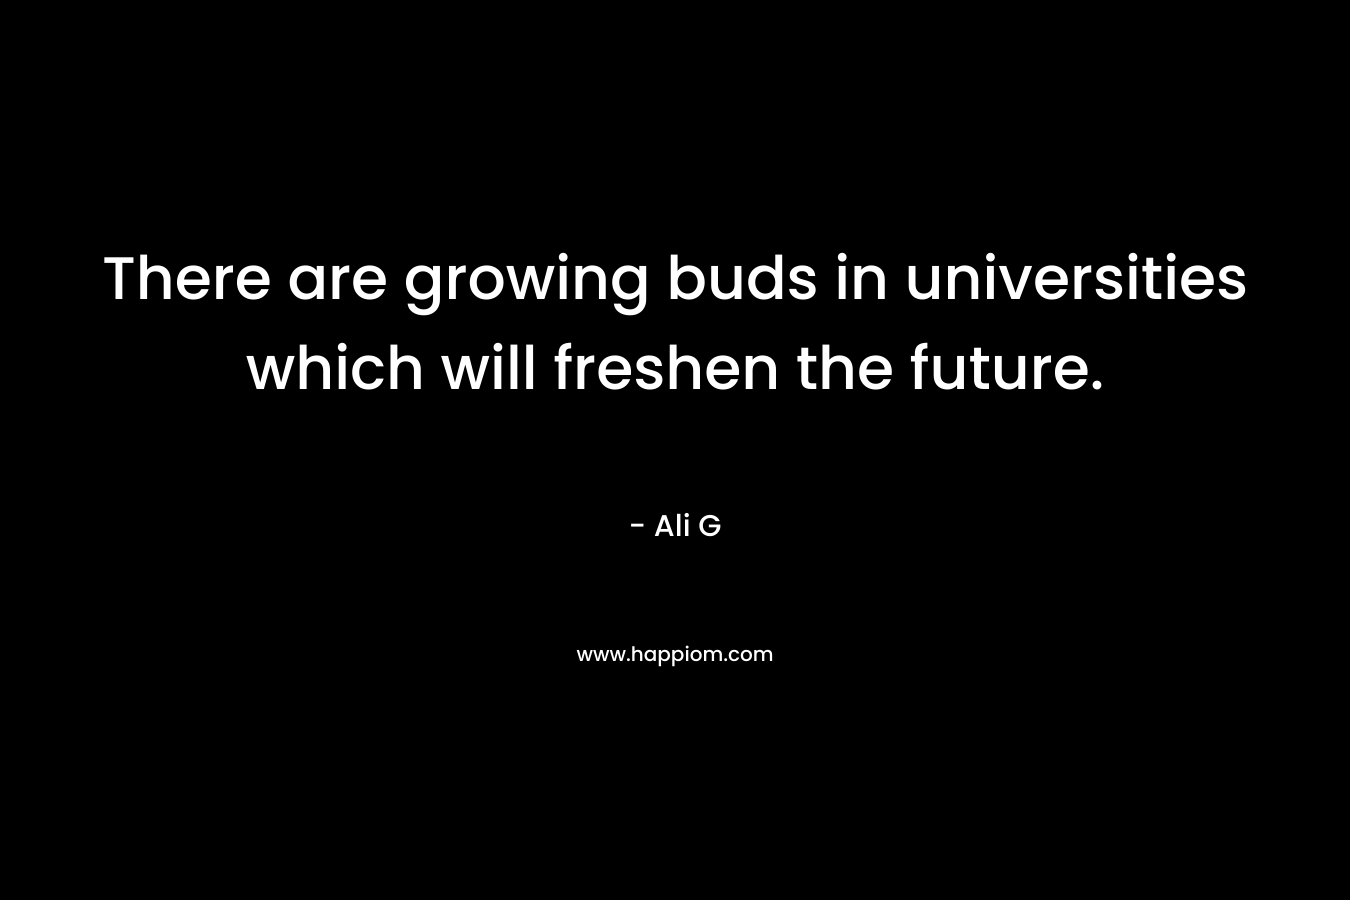 There are growing buds in universities which will freshen the future. – Ali G